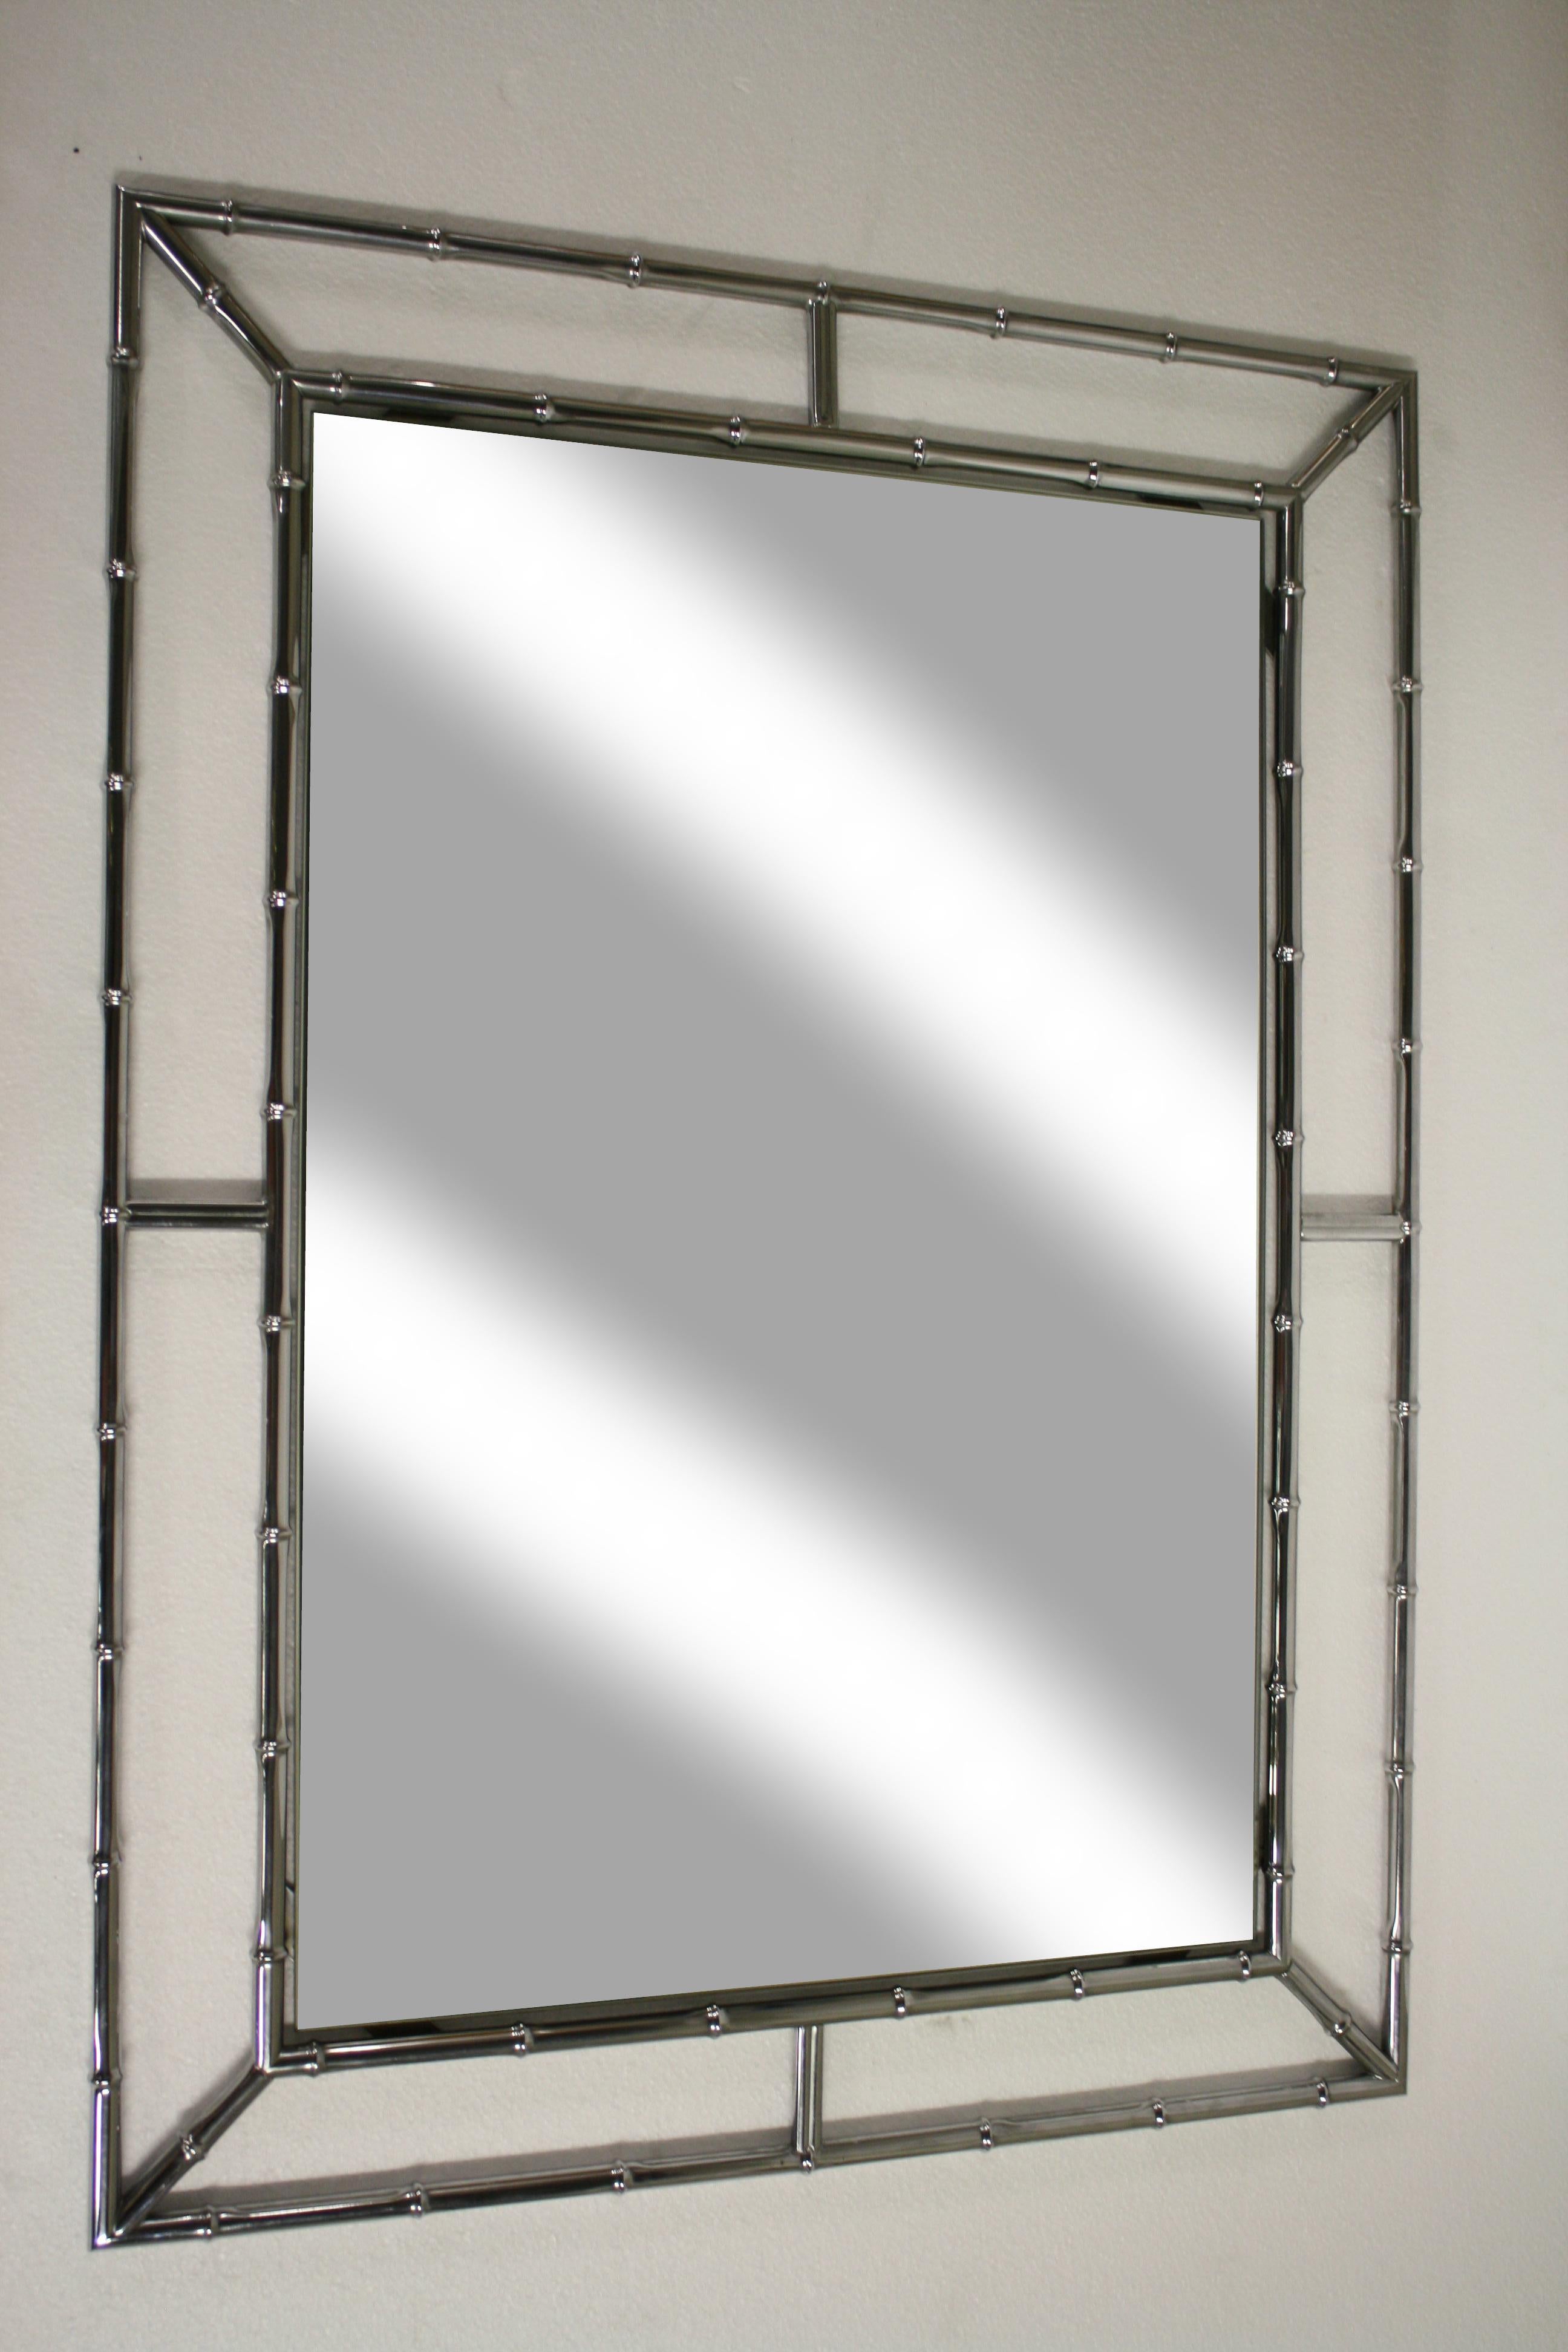 Hollywood Regency Faux Bamboo Mirror in Chrome, France, 1960s For Sale